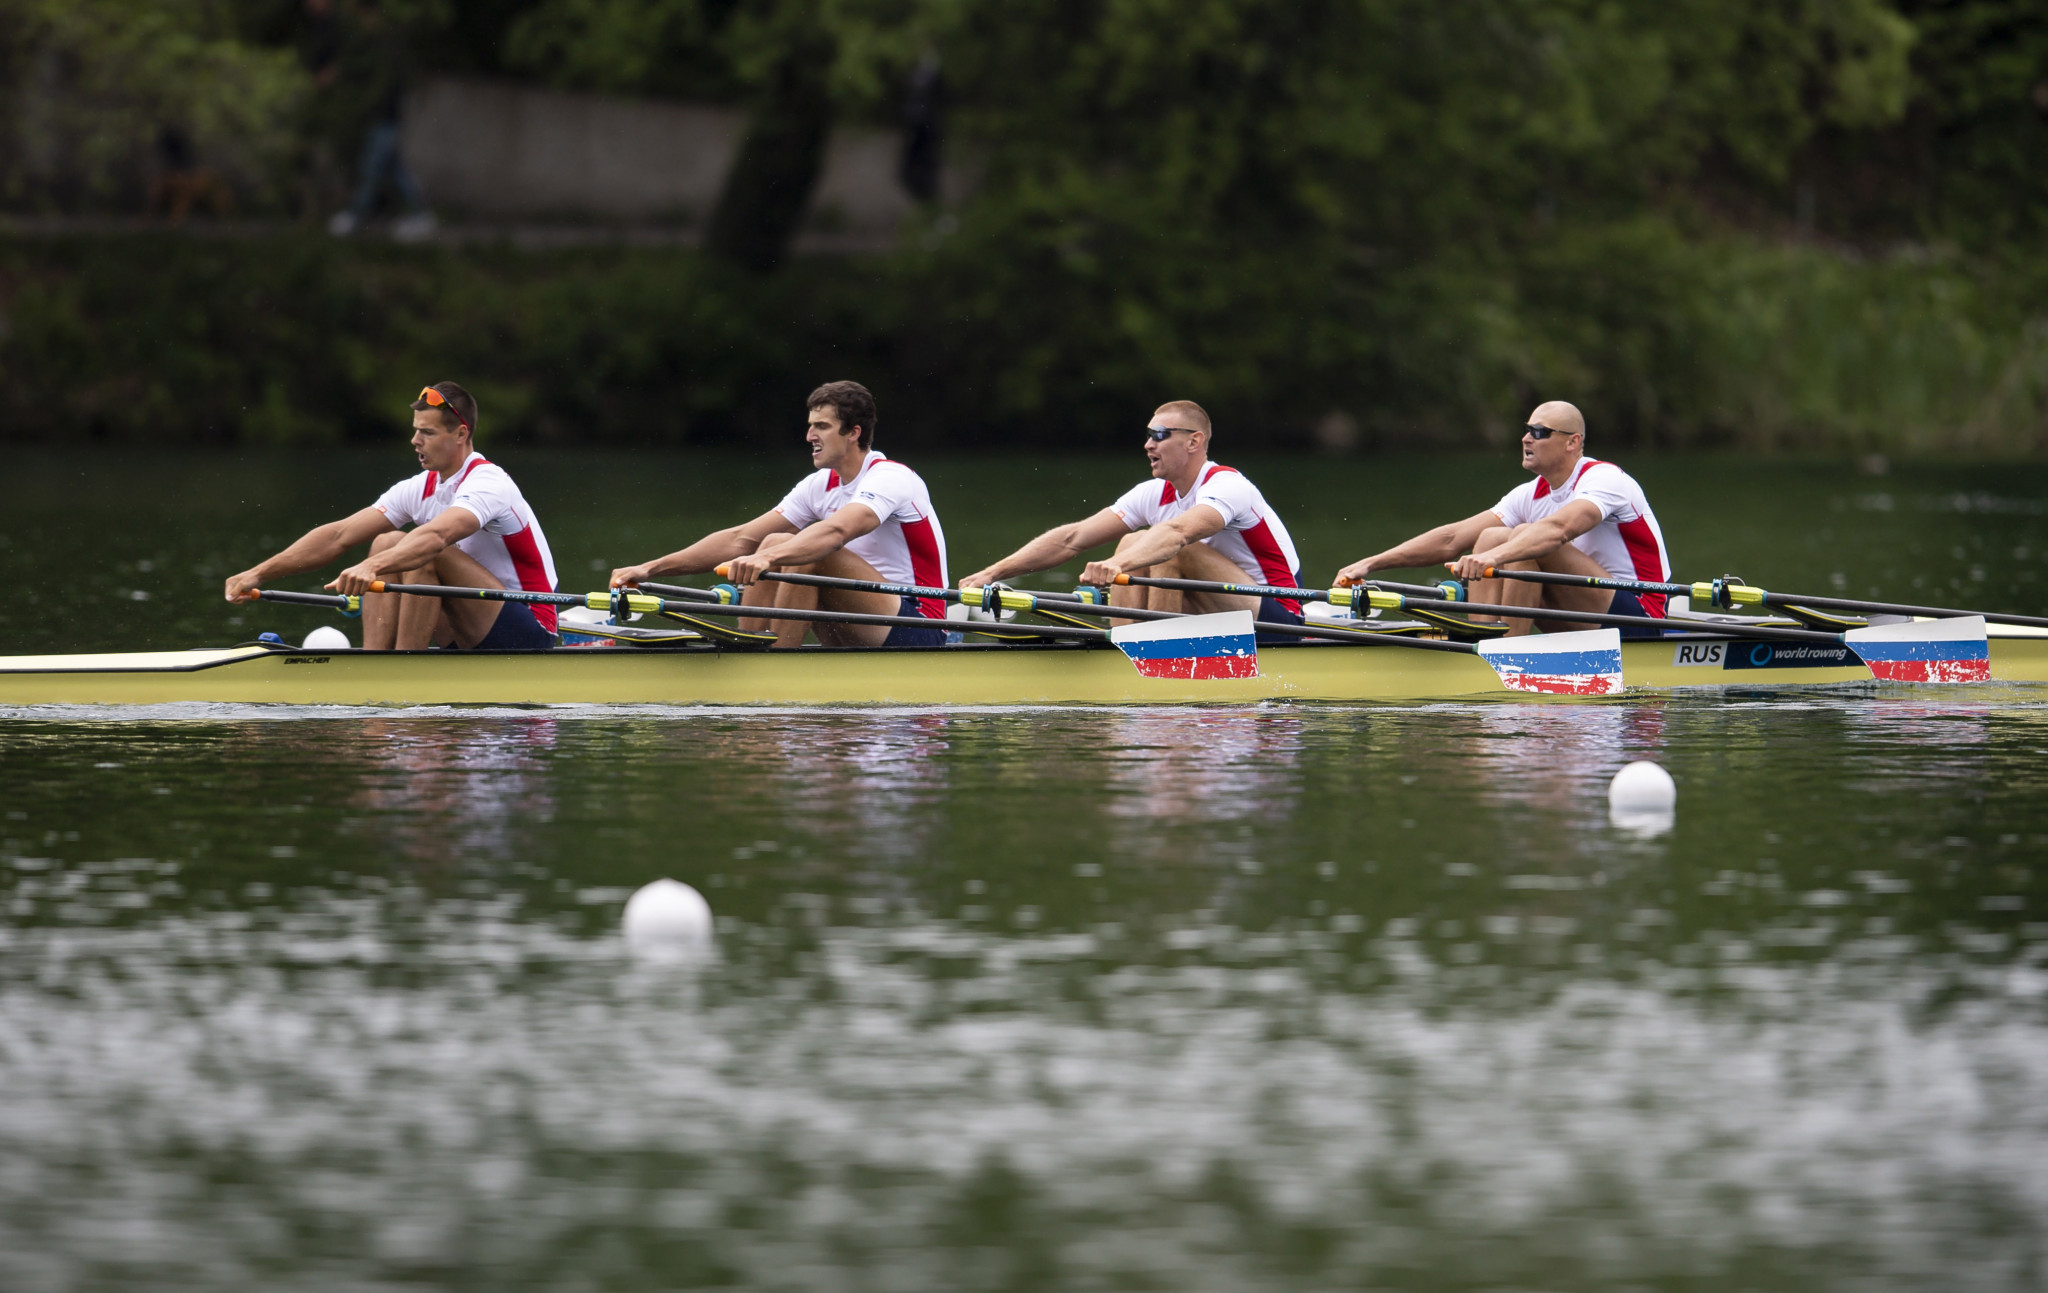 The IOC's relaxed recommendations do not apply to team events, and World Rowing has formed a Working Group to discuss its policy on Russia and Belarus ©Getty Images